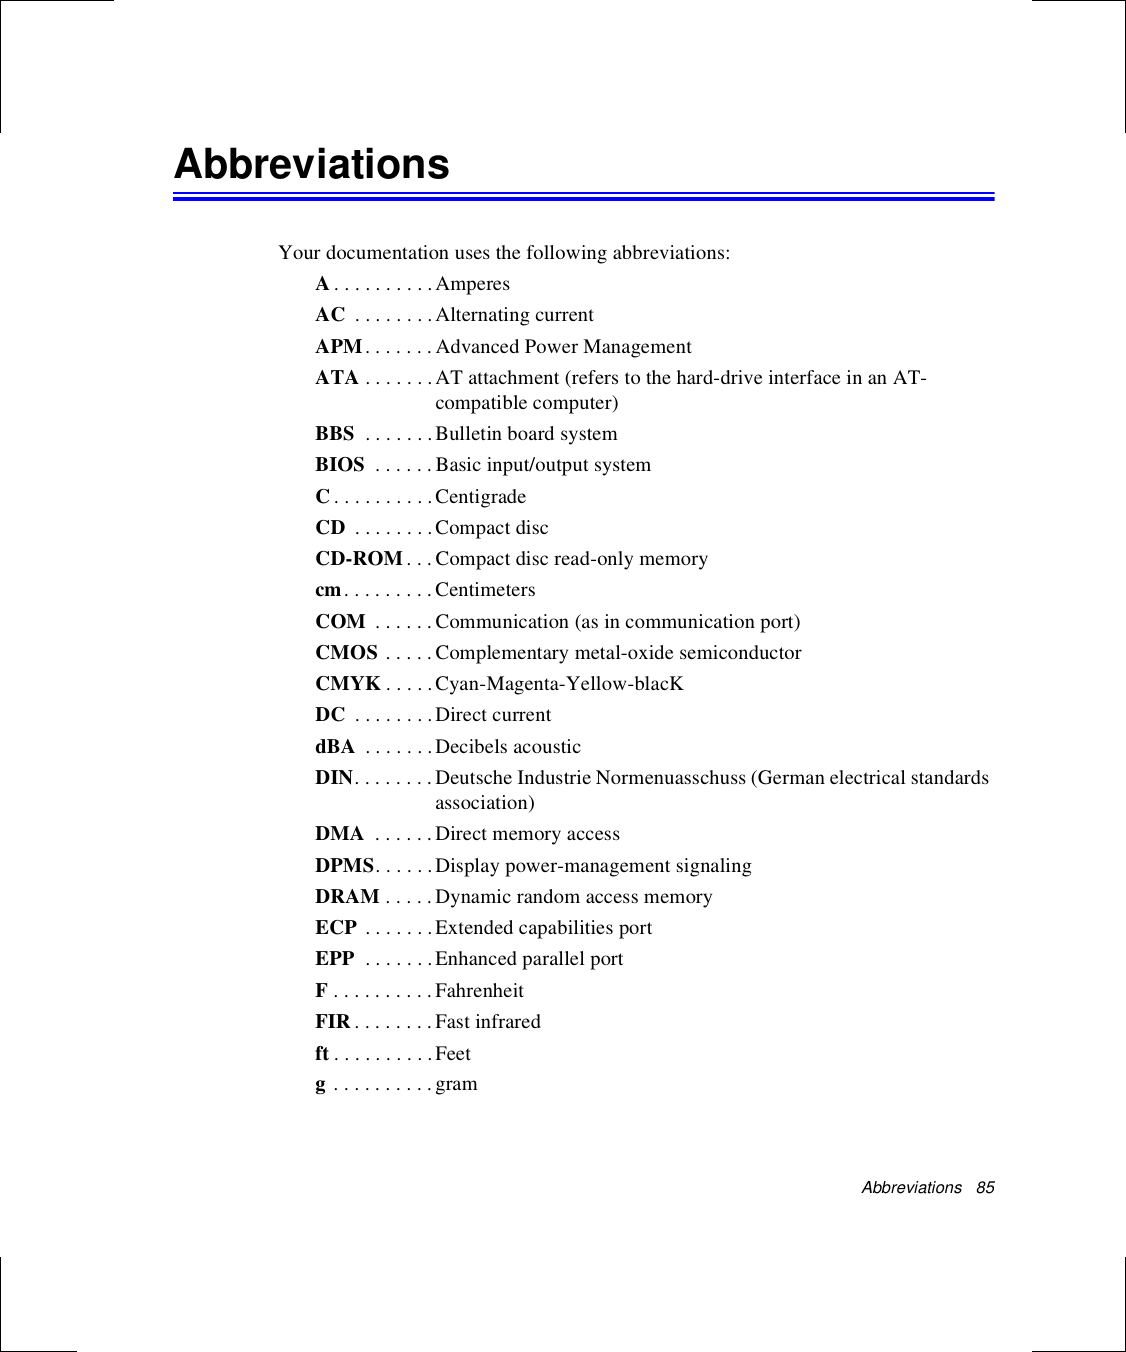 Abbreviations   85AbbreviationsYour documentation uses the following abbreviations:A. . . . . . . . . . AmperesAC  . . . . . . . . Alternating currentAPM. . . . . . . Advanced Power ManagementATA . . . . . . .AT attachment (refers to the hard-drive interface in an AT-compatible computer)BBS  . . . . . . .Bulletin board systemBIOS  . . . . . . Basic input/output systemC. . . . . . . . . . CentigradeCD  . . . . . . . . Compact discCD-ROM . . .Compact disc read-only memorycm. . . . . . . . . CentimetersCOM  . . . . . .Communication (as in communication port)CMOS . . . . .Complementary metal-oxide semiconductorCMYK . . . . .Cyan-Magenta-Yellow-blacKDC  . . . . . . . . Direct currentdBA  . . . . . . . Decibels acousticDIN. . . . . . . . Deutsche Industrie Normenuasschuss (German electrical standards association)DMA  . . . . . . Direct memory accessDPMS. . . . . .Display power-management signalingDRAM . . . . . Dynamic random access memoryECP . . . . . . .Extended capabilities portEPP  . . . . . . . Enhanced parallel portF . . . . . . . . . . FahrenheitFIR . . . . . . . . Fast infraredft . . . . . . . . . . Feetg . . . . . . . . . . gram